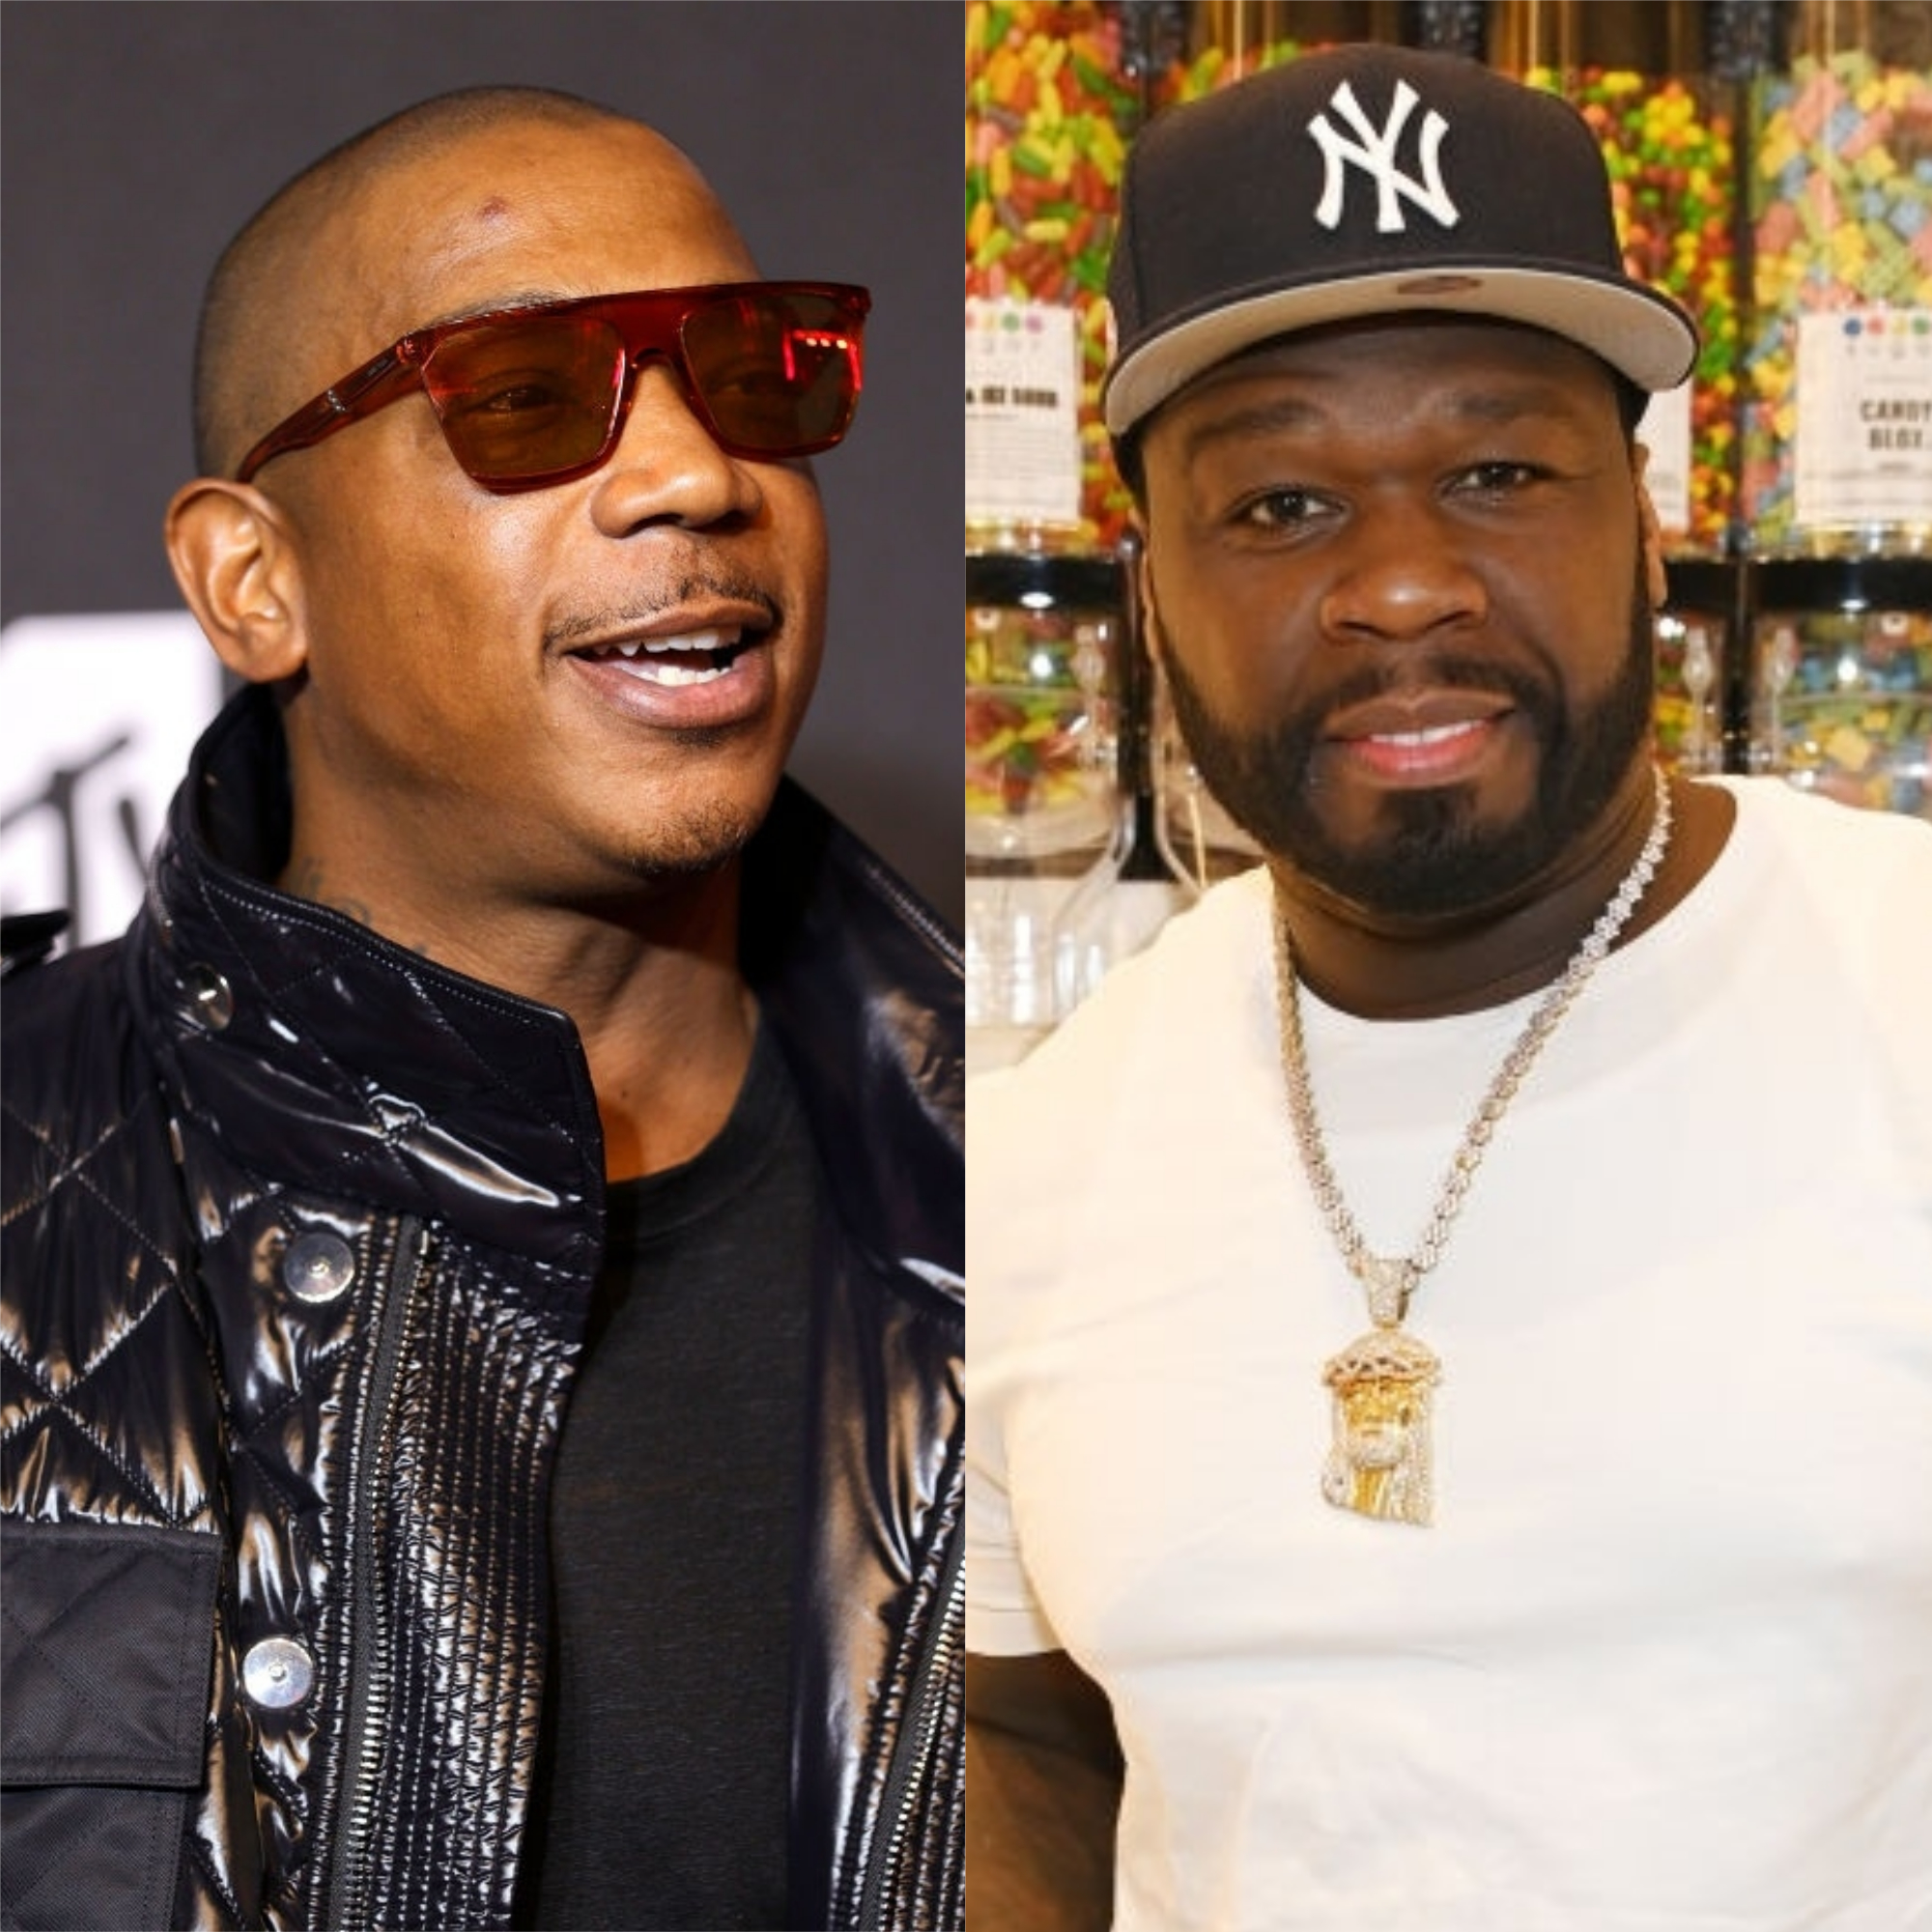 Ja Rule Responds To 50 Cent: “You’re Nothing Without Eminem”